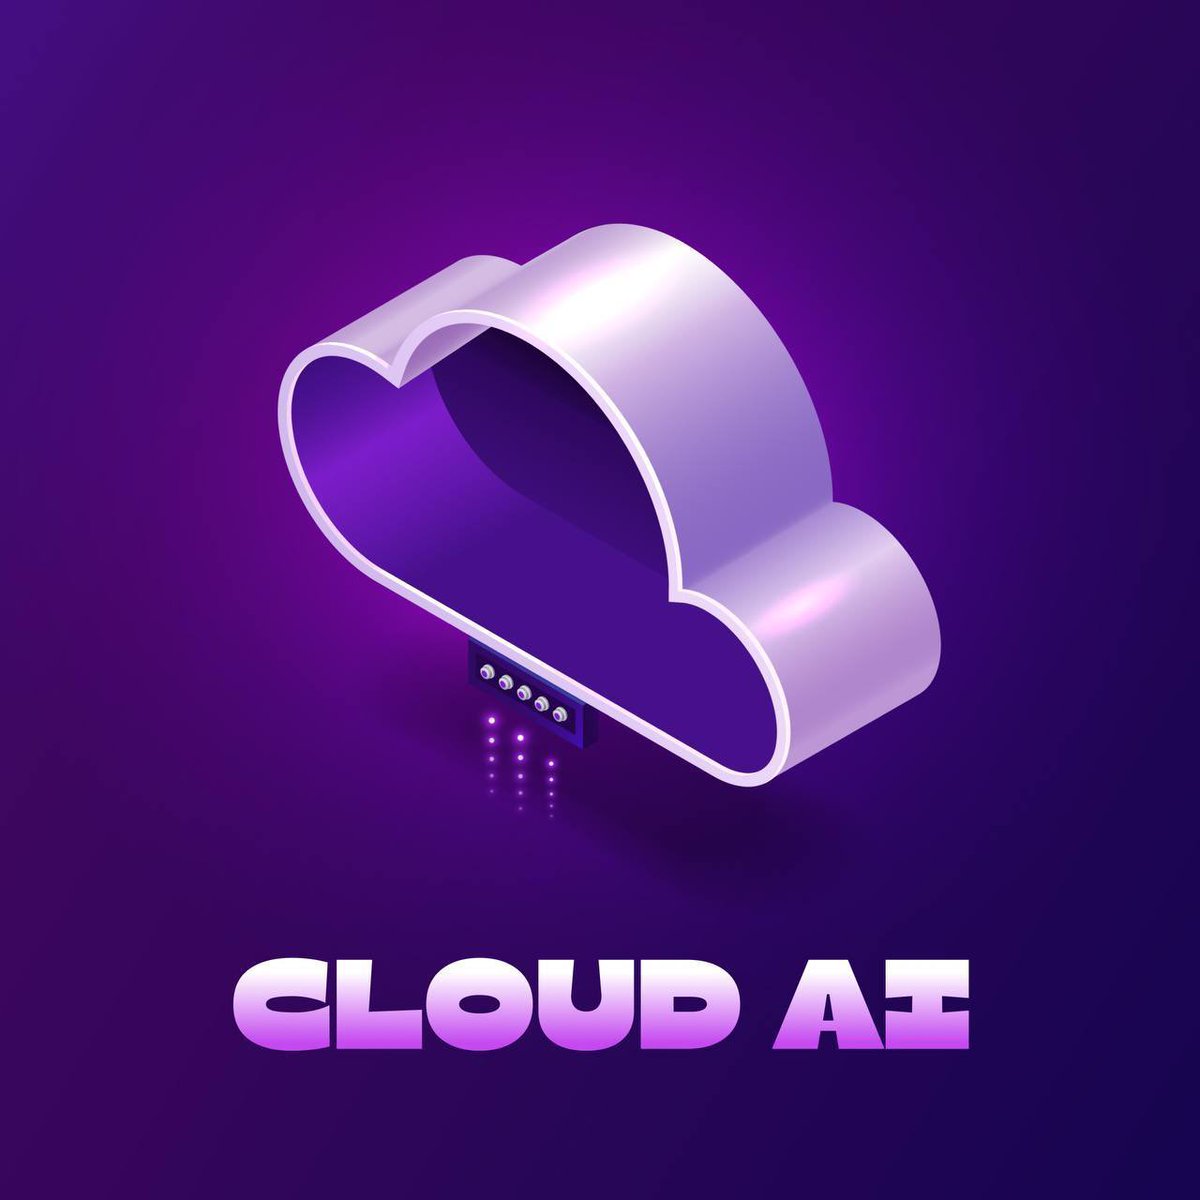 CLOUD AI - $CAI

CloudAI introduces a new era of decentralization to the landscape of Cloud Computing And Technology. By harnessing the innovative potential of DePIN (Decentralized Physical Infrastructure Networks), CloudAI provides unmatched gateways to the world of cloud